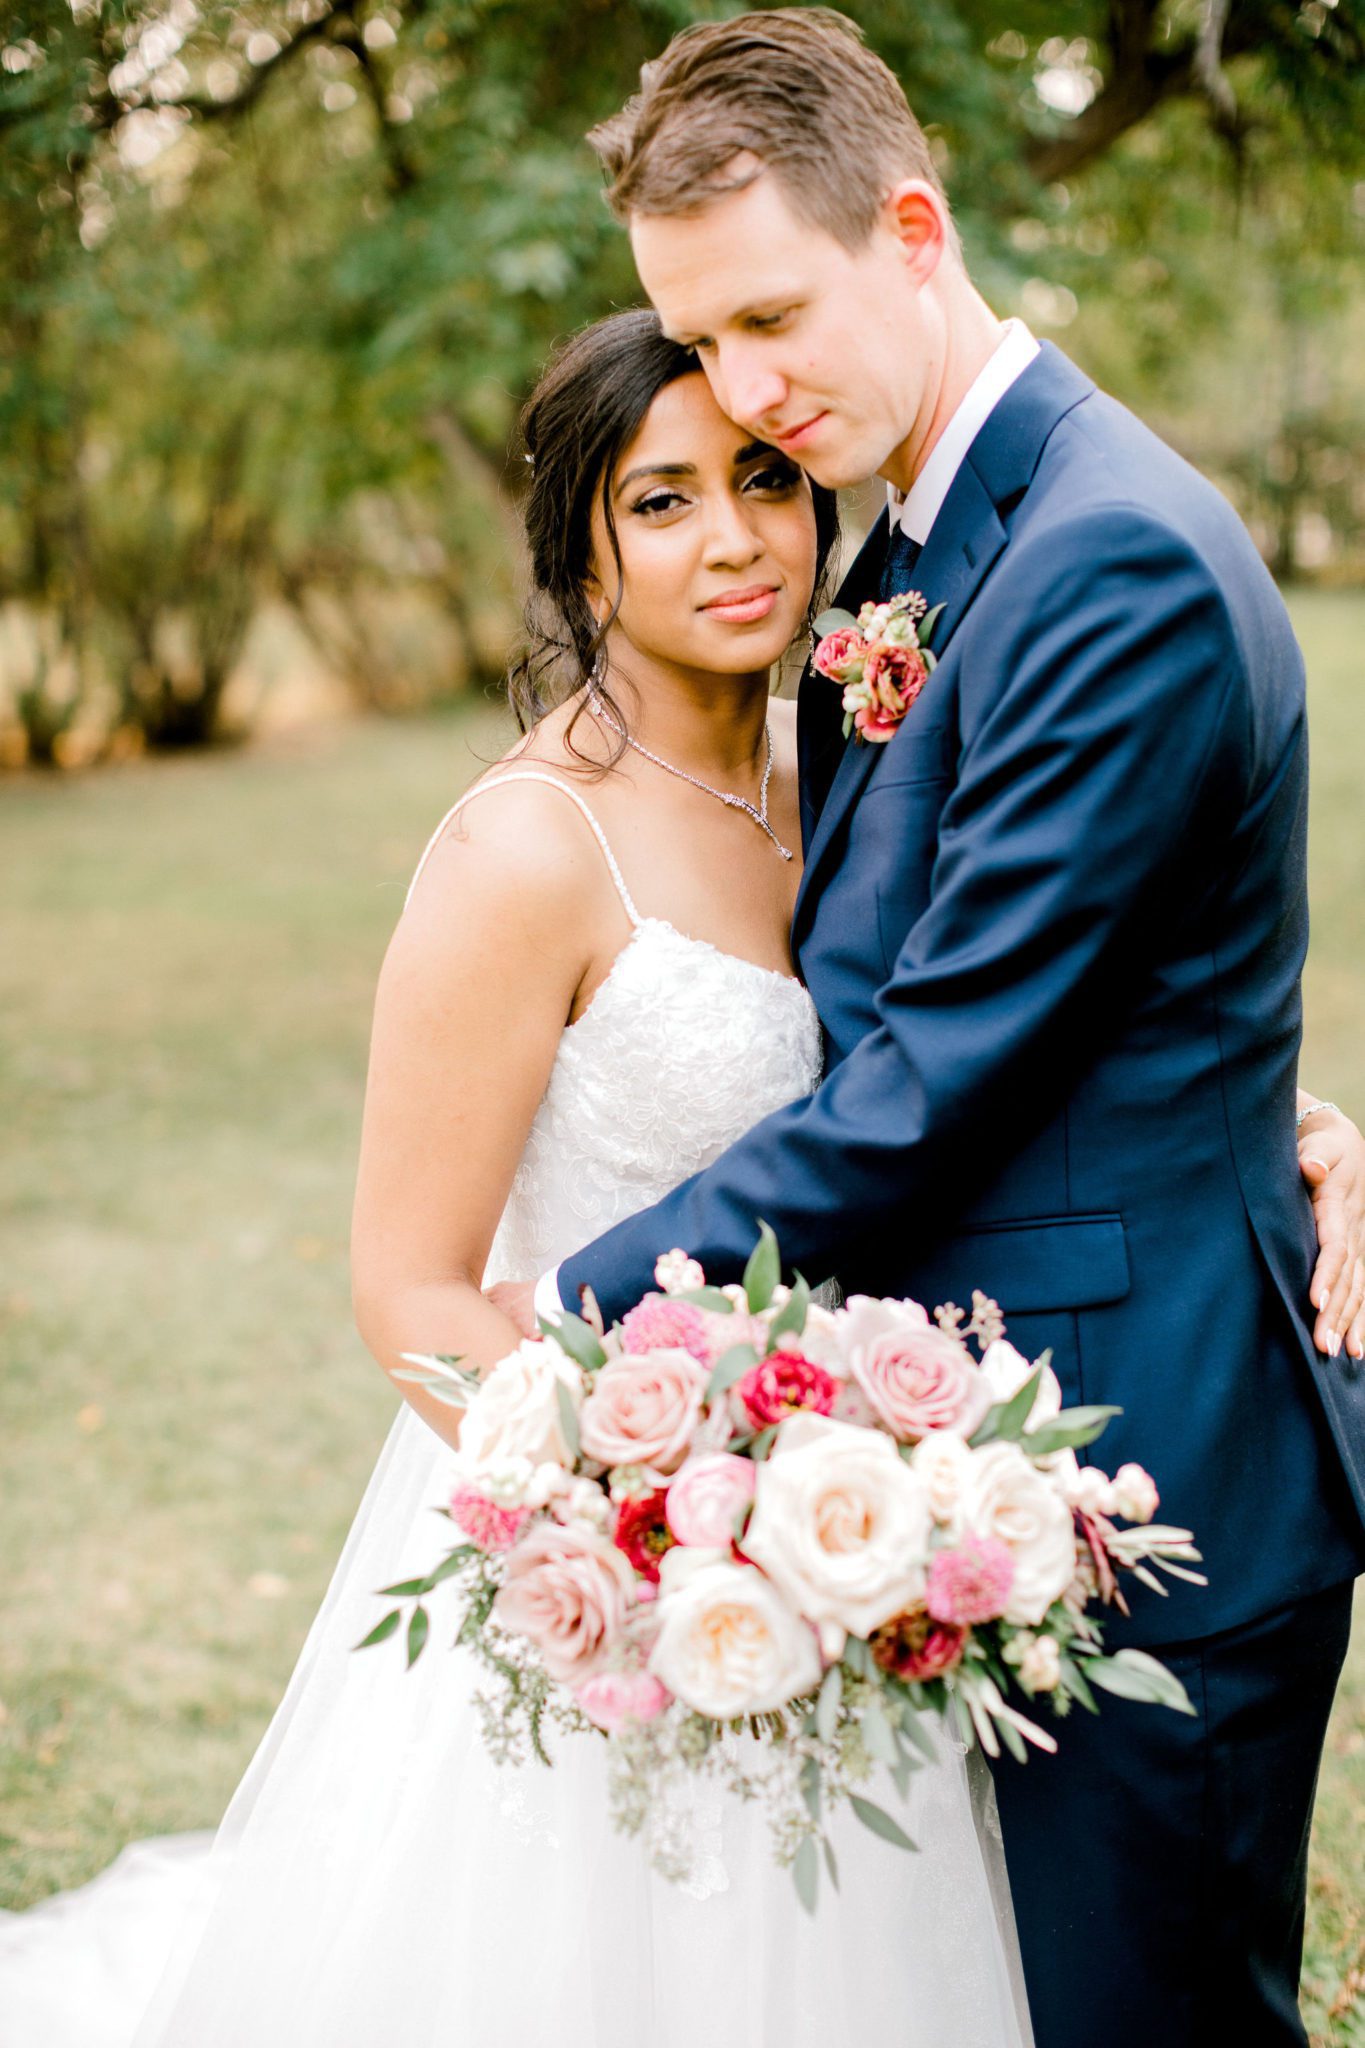 Romantic portrait of bride and groom with a stunning pink, blush and white bridal bouquet